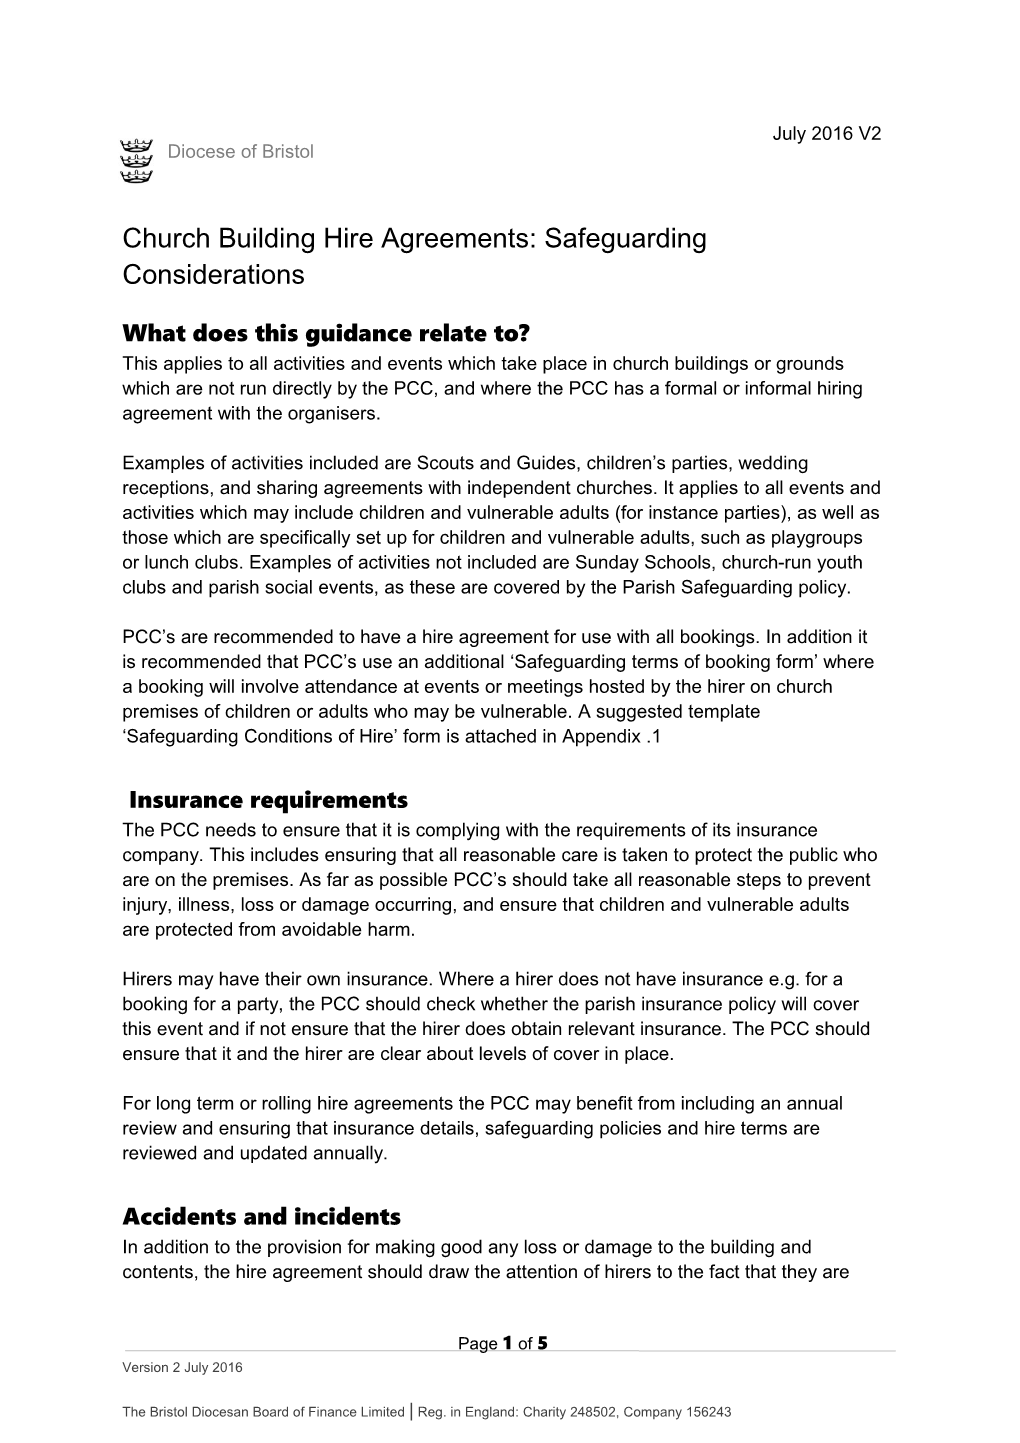 Church Building Hire Agreements: Safeguarding Considerations